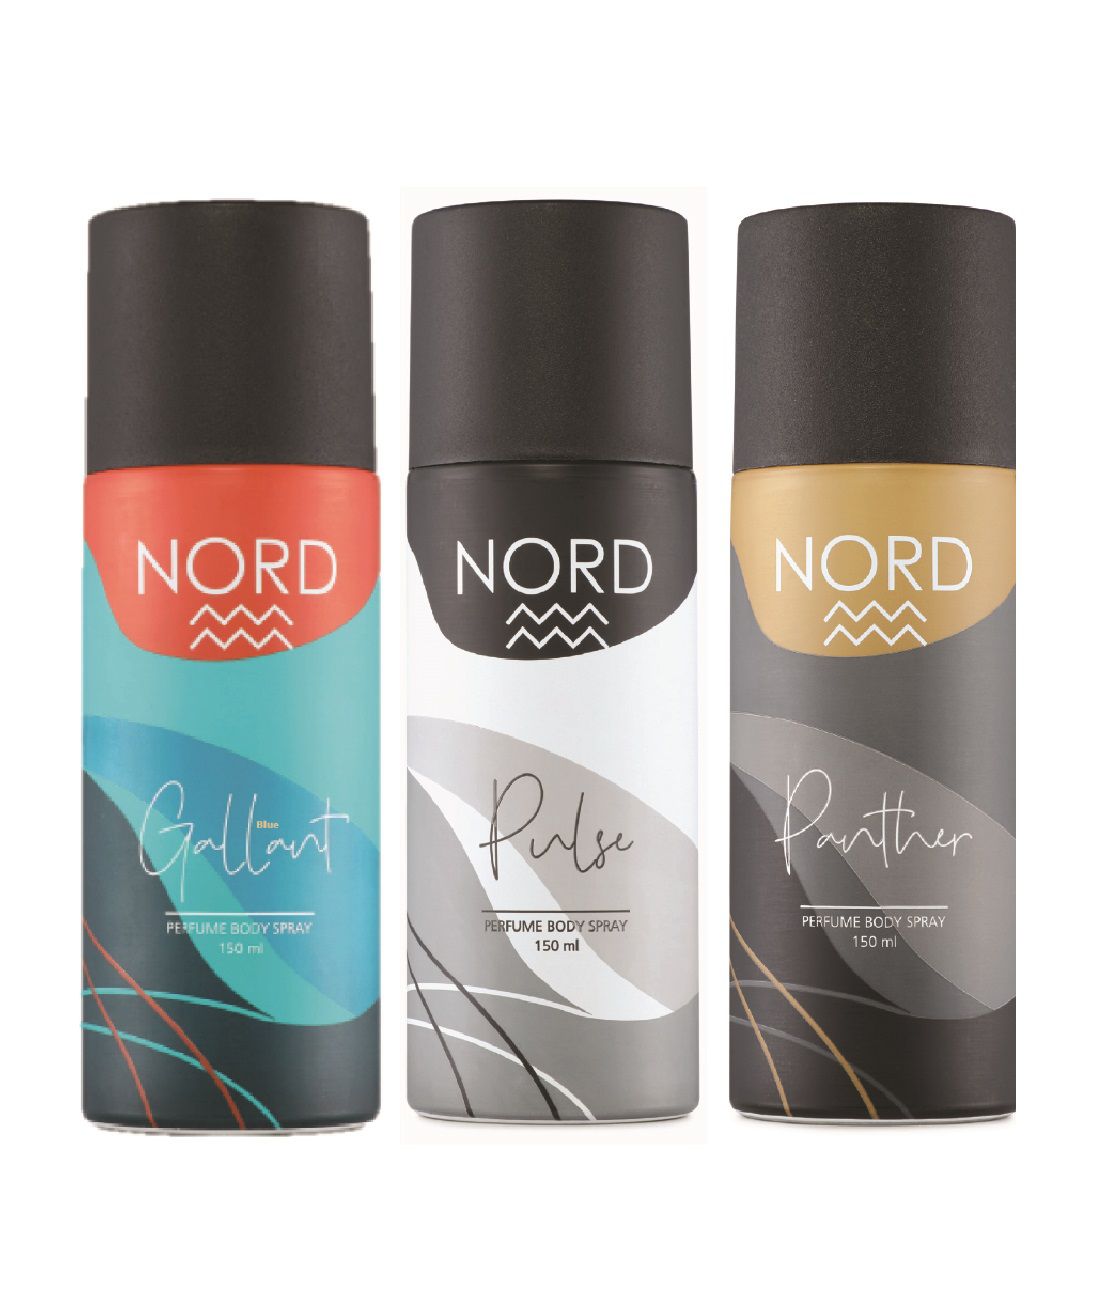     			NORD Deodorant Body Spray - Gallant, Panther and Pulse 150 ml each (Pack of 3)